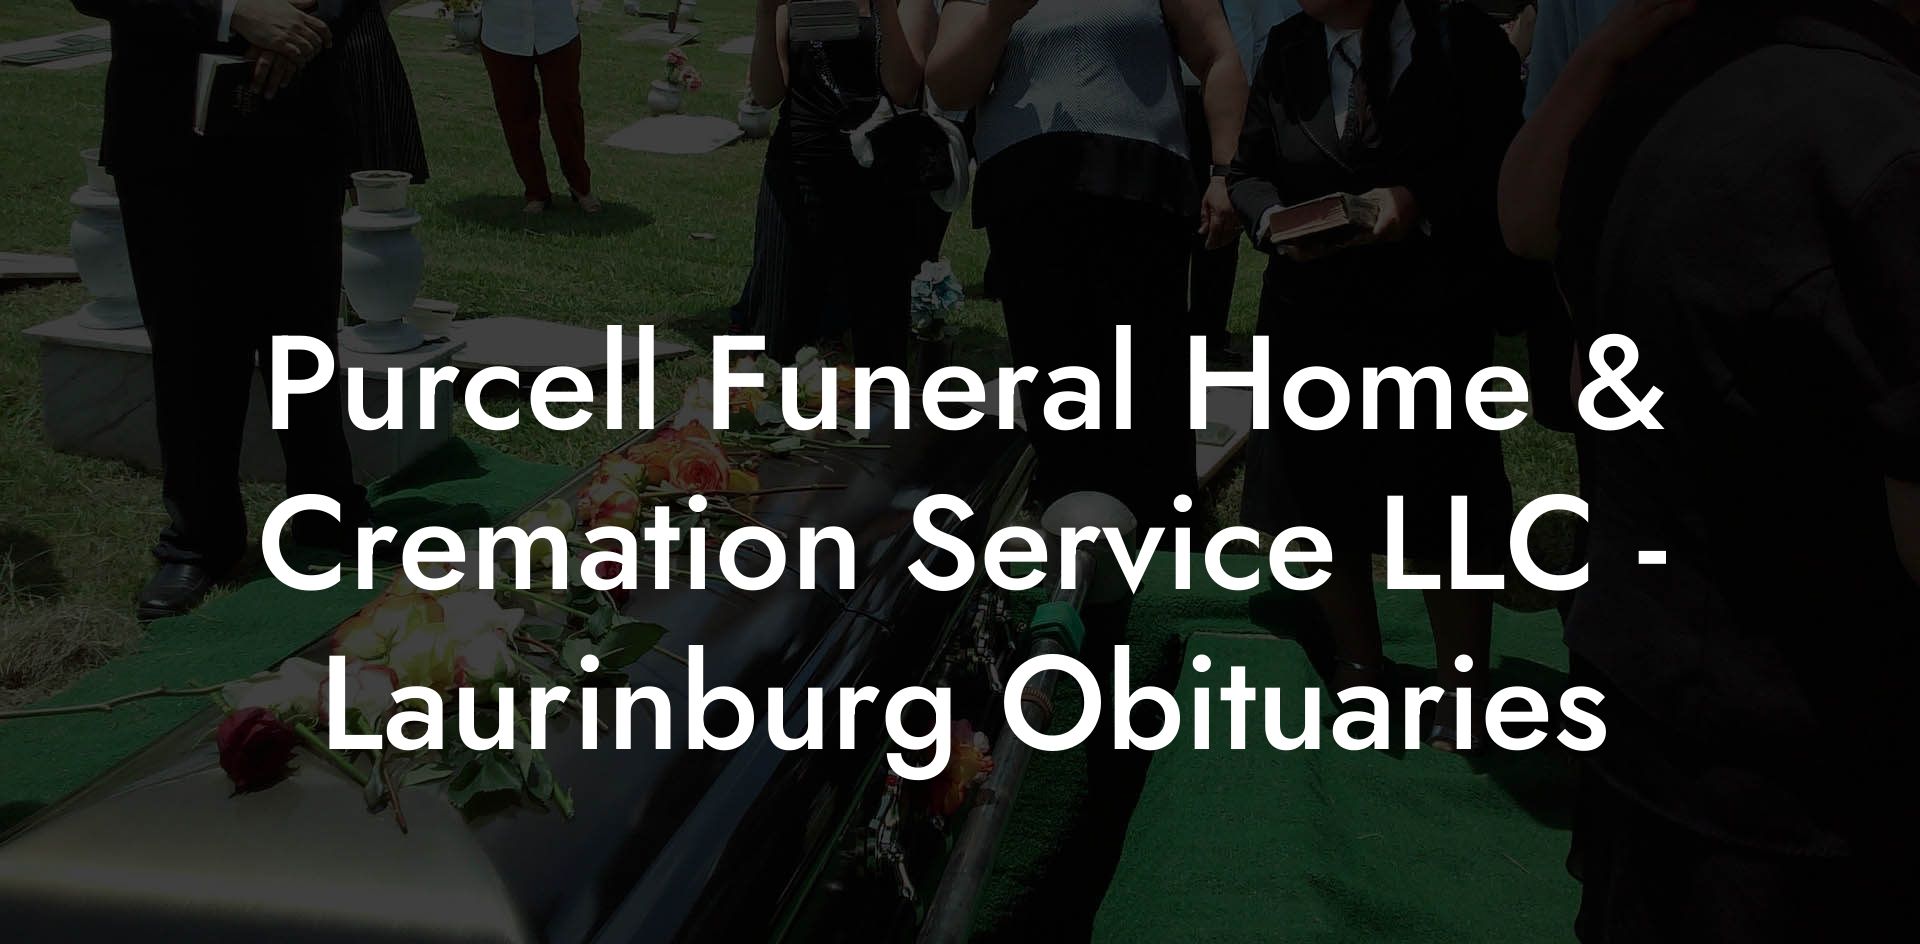 Purcell Funeral Home & Cremation Service LLC - Laurinburg Obituaries